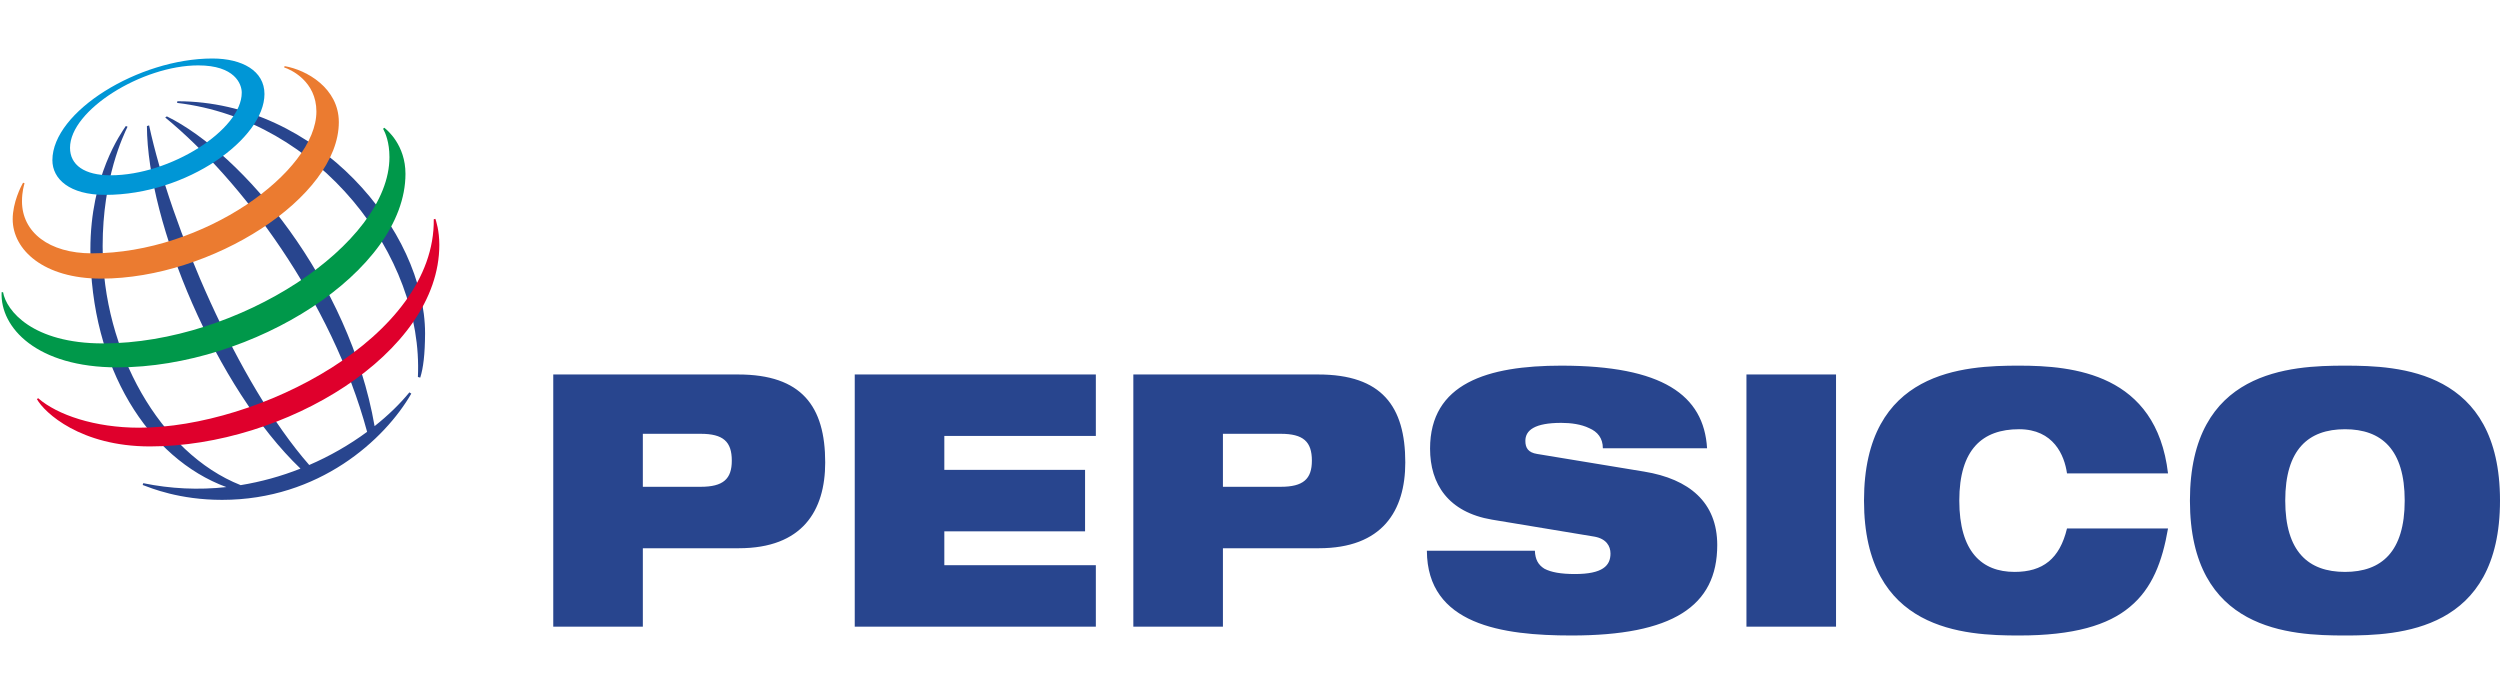 PepsiCo (PEP) hits 51 years of annual payouts. Boosts dividend 10%